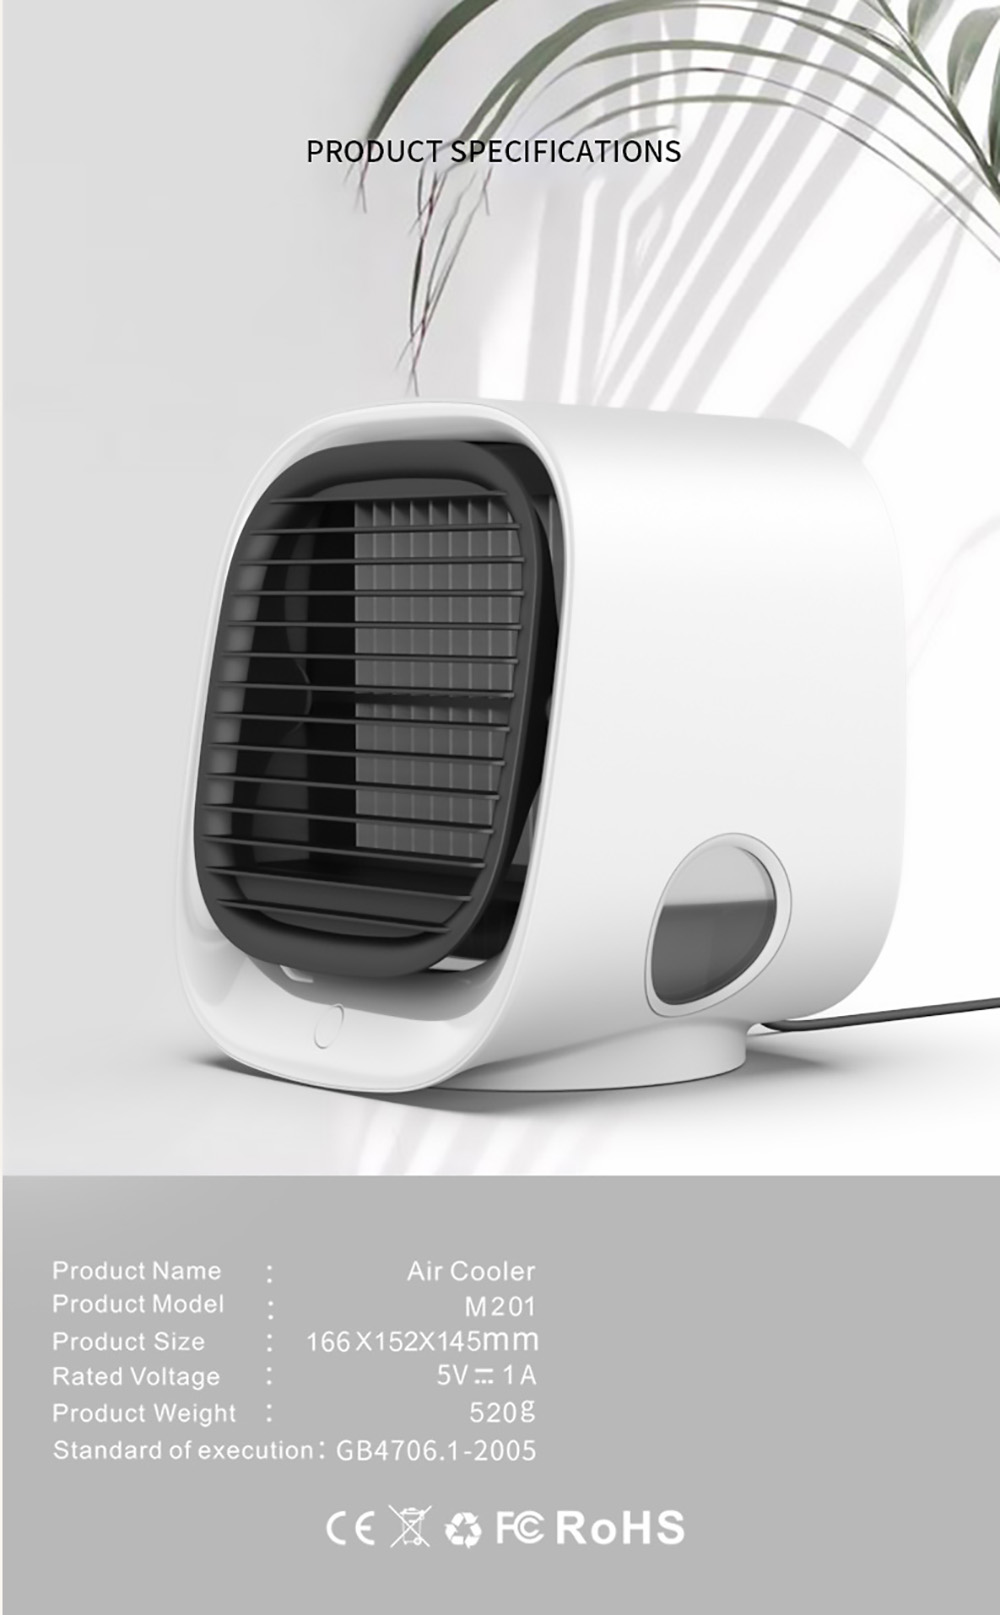 Desktop Mini Air Cooler, 3 Levels Speed, Home Air Conditioner Fan, Portable Cooling Fan, Low Noise, Night Light - White